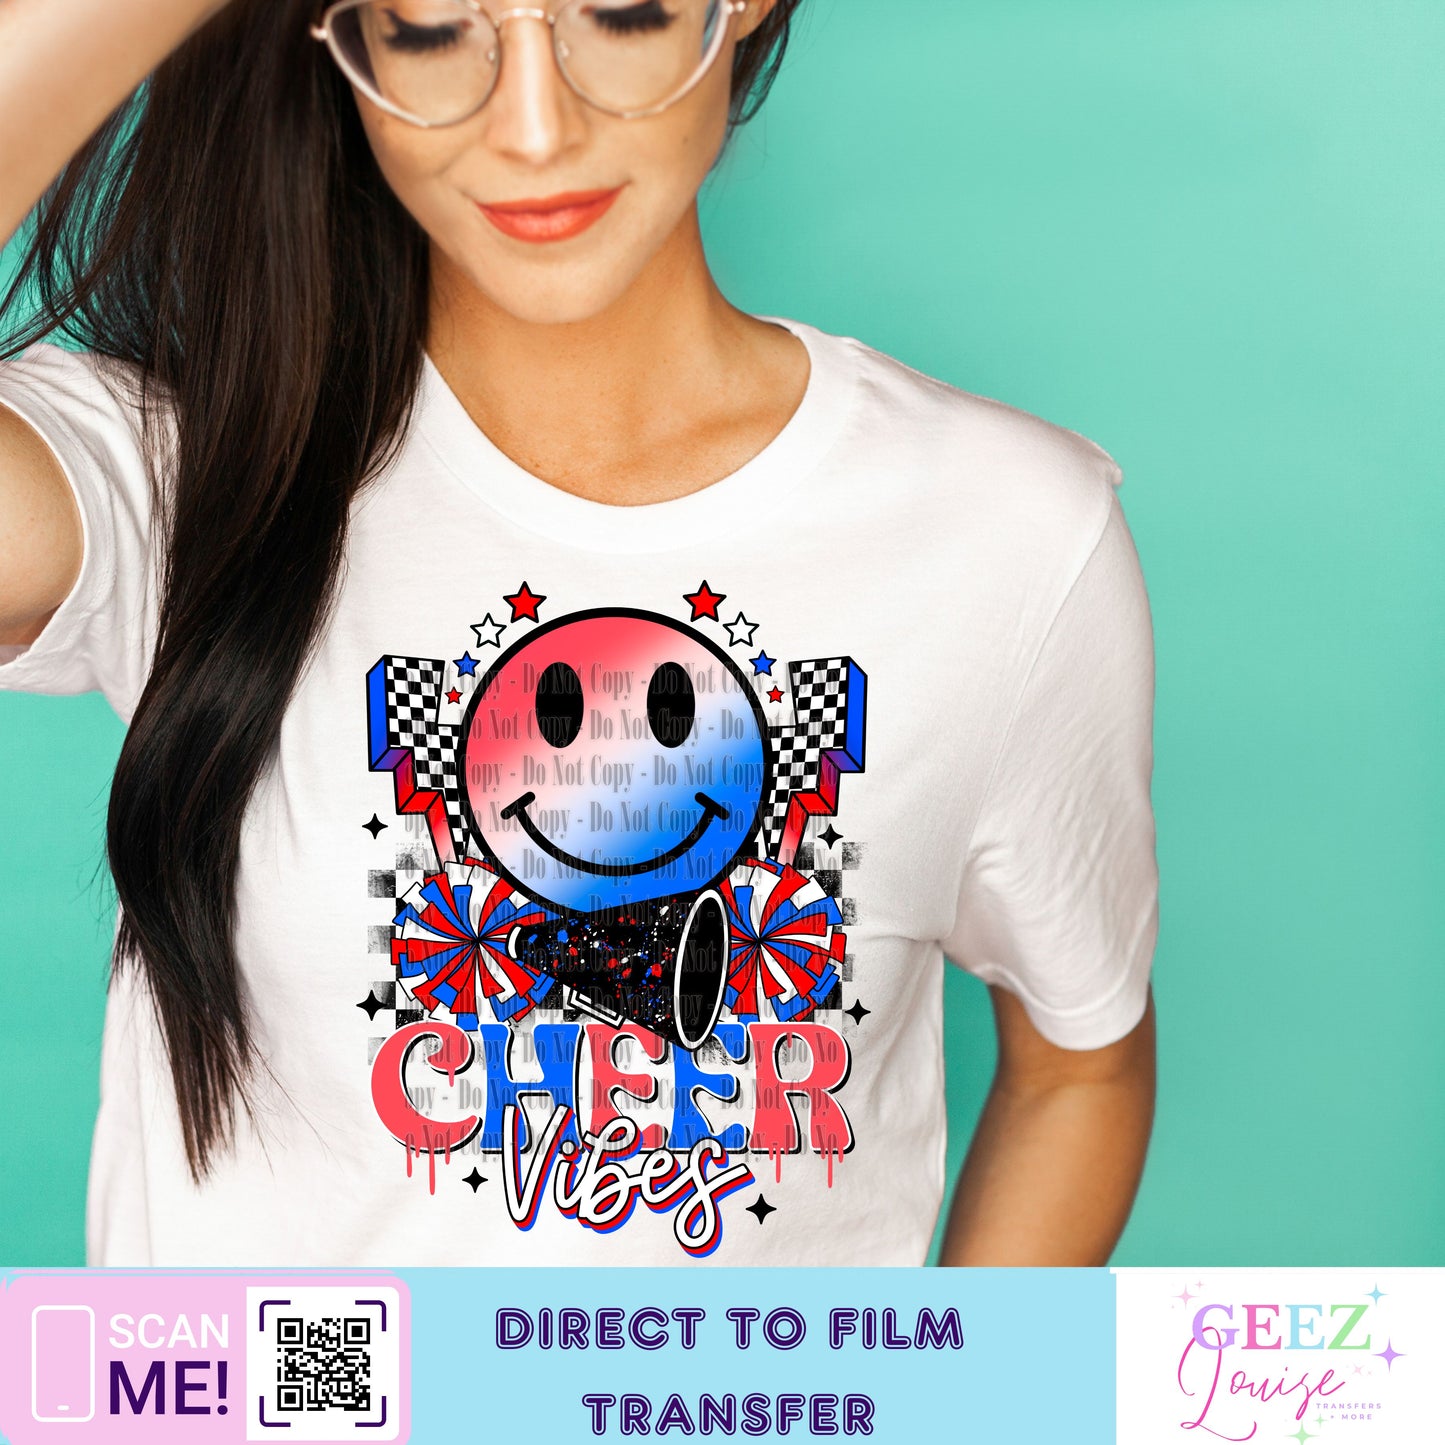 Cheer vibes red white blue - Direct to Film Transfer - made to order